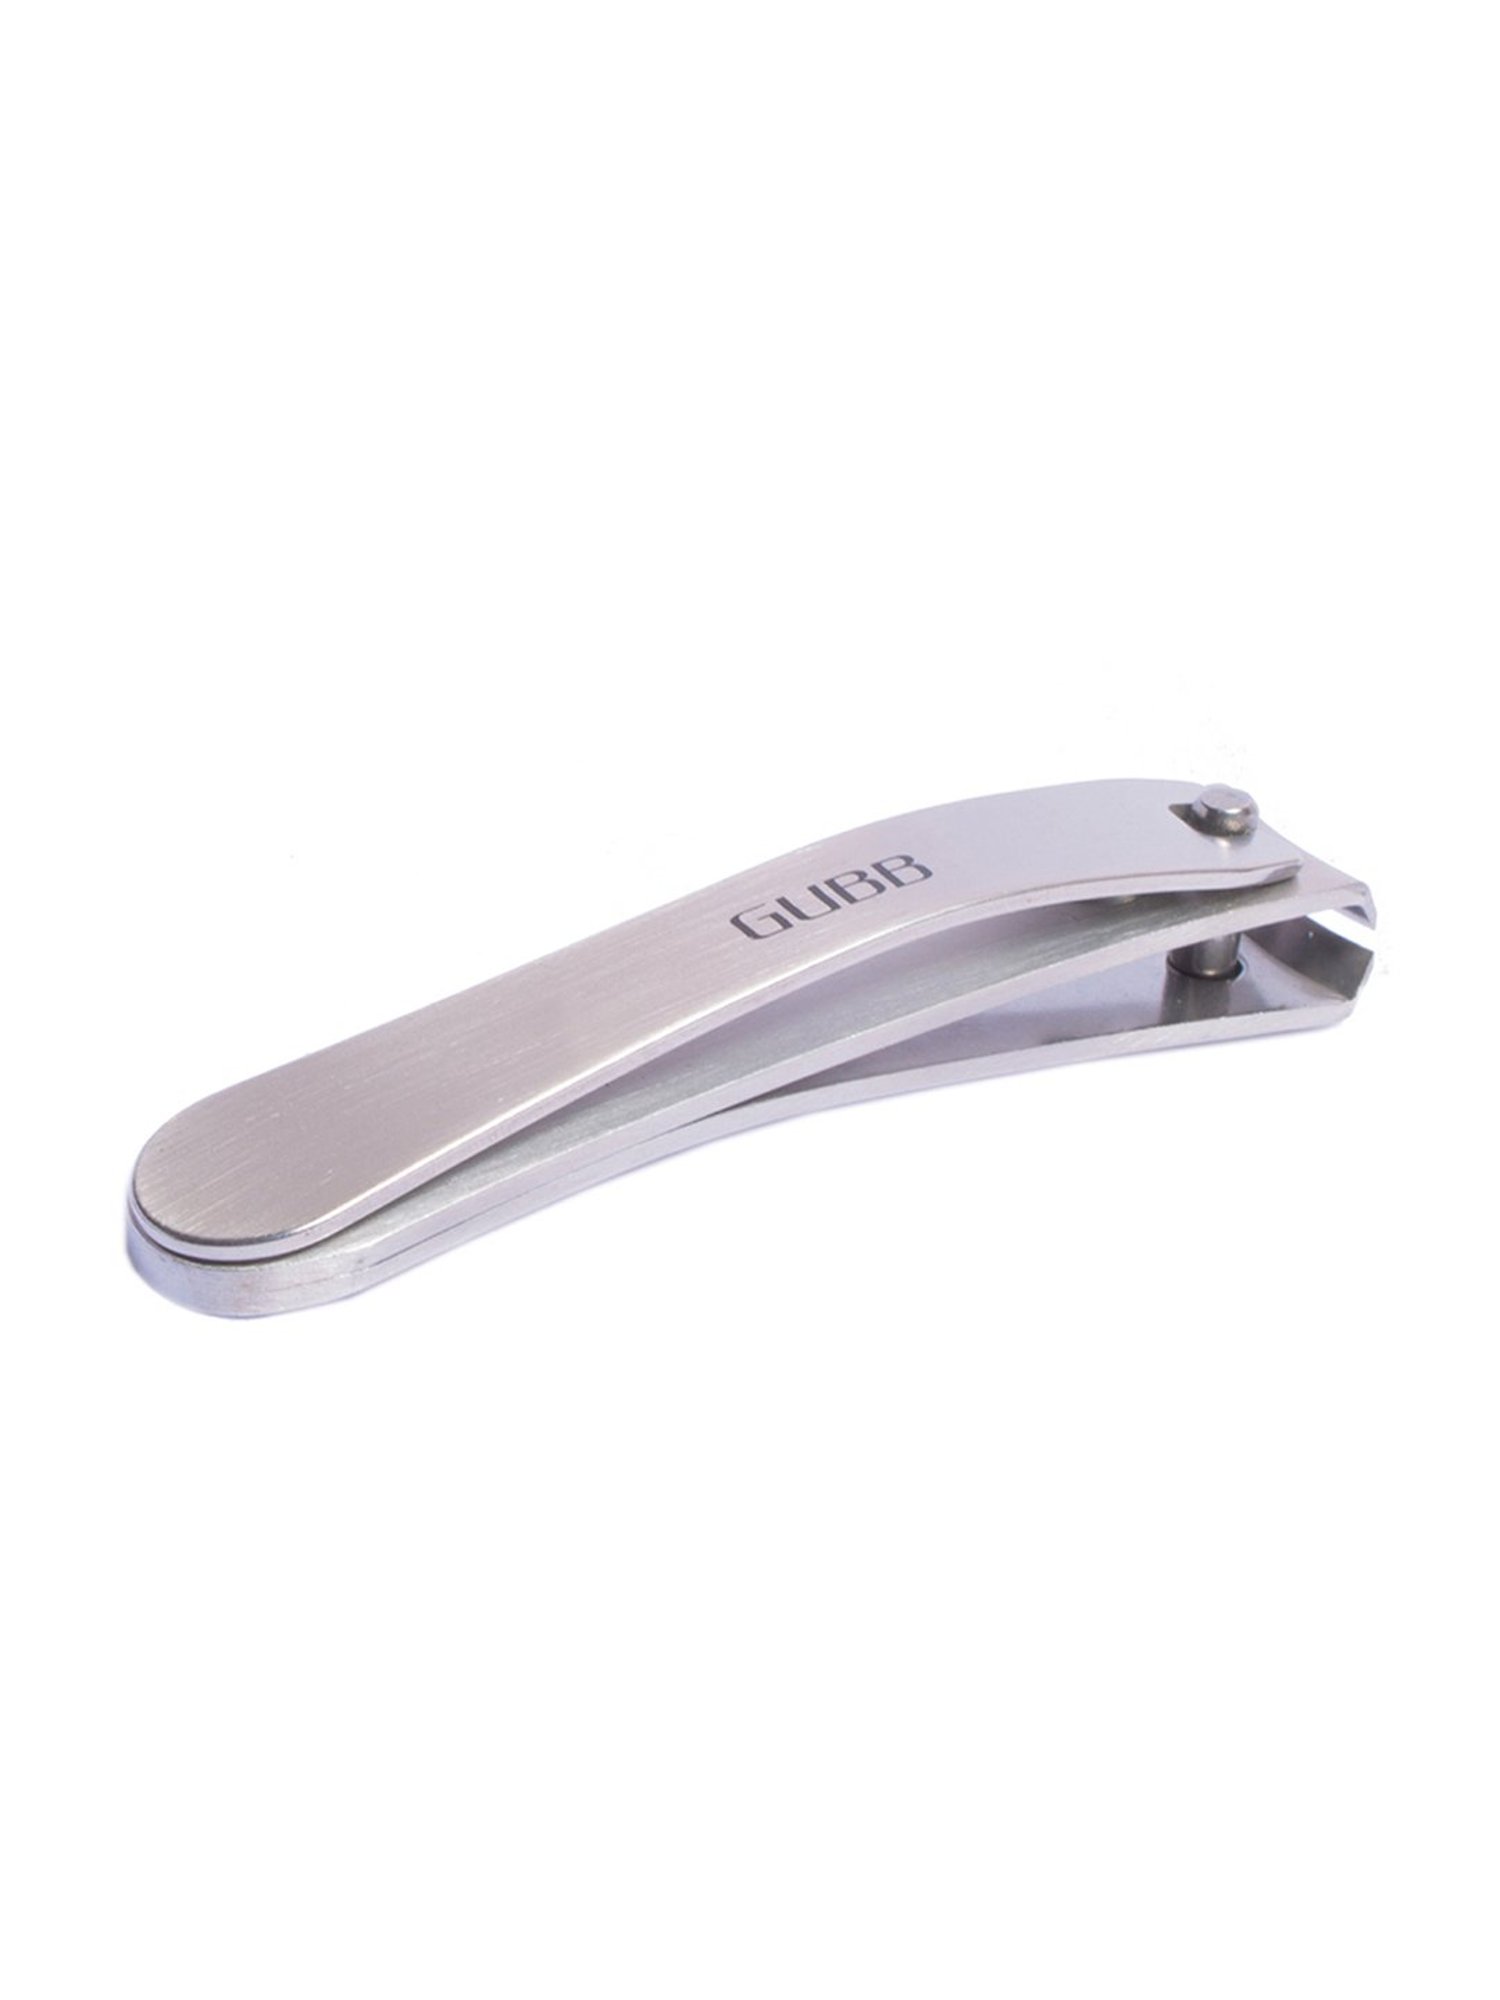 Buy Gubb Finger & Toe Nail Clipper/Cutter Box of 12 Online at Low Prices in  India - Amazon.in